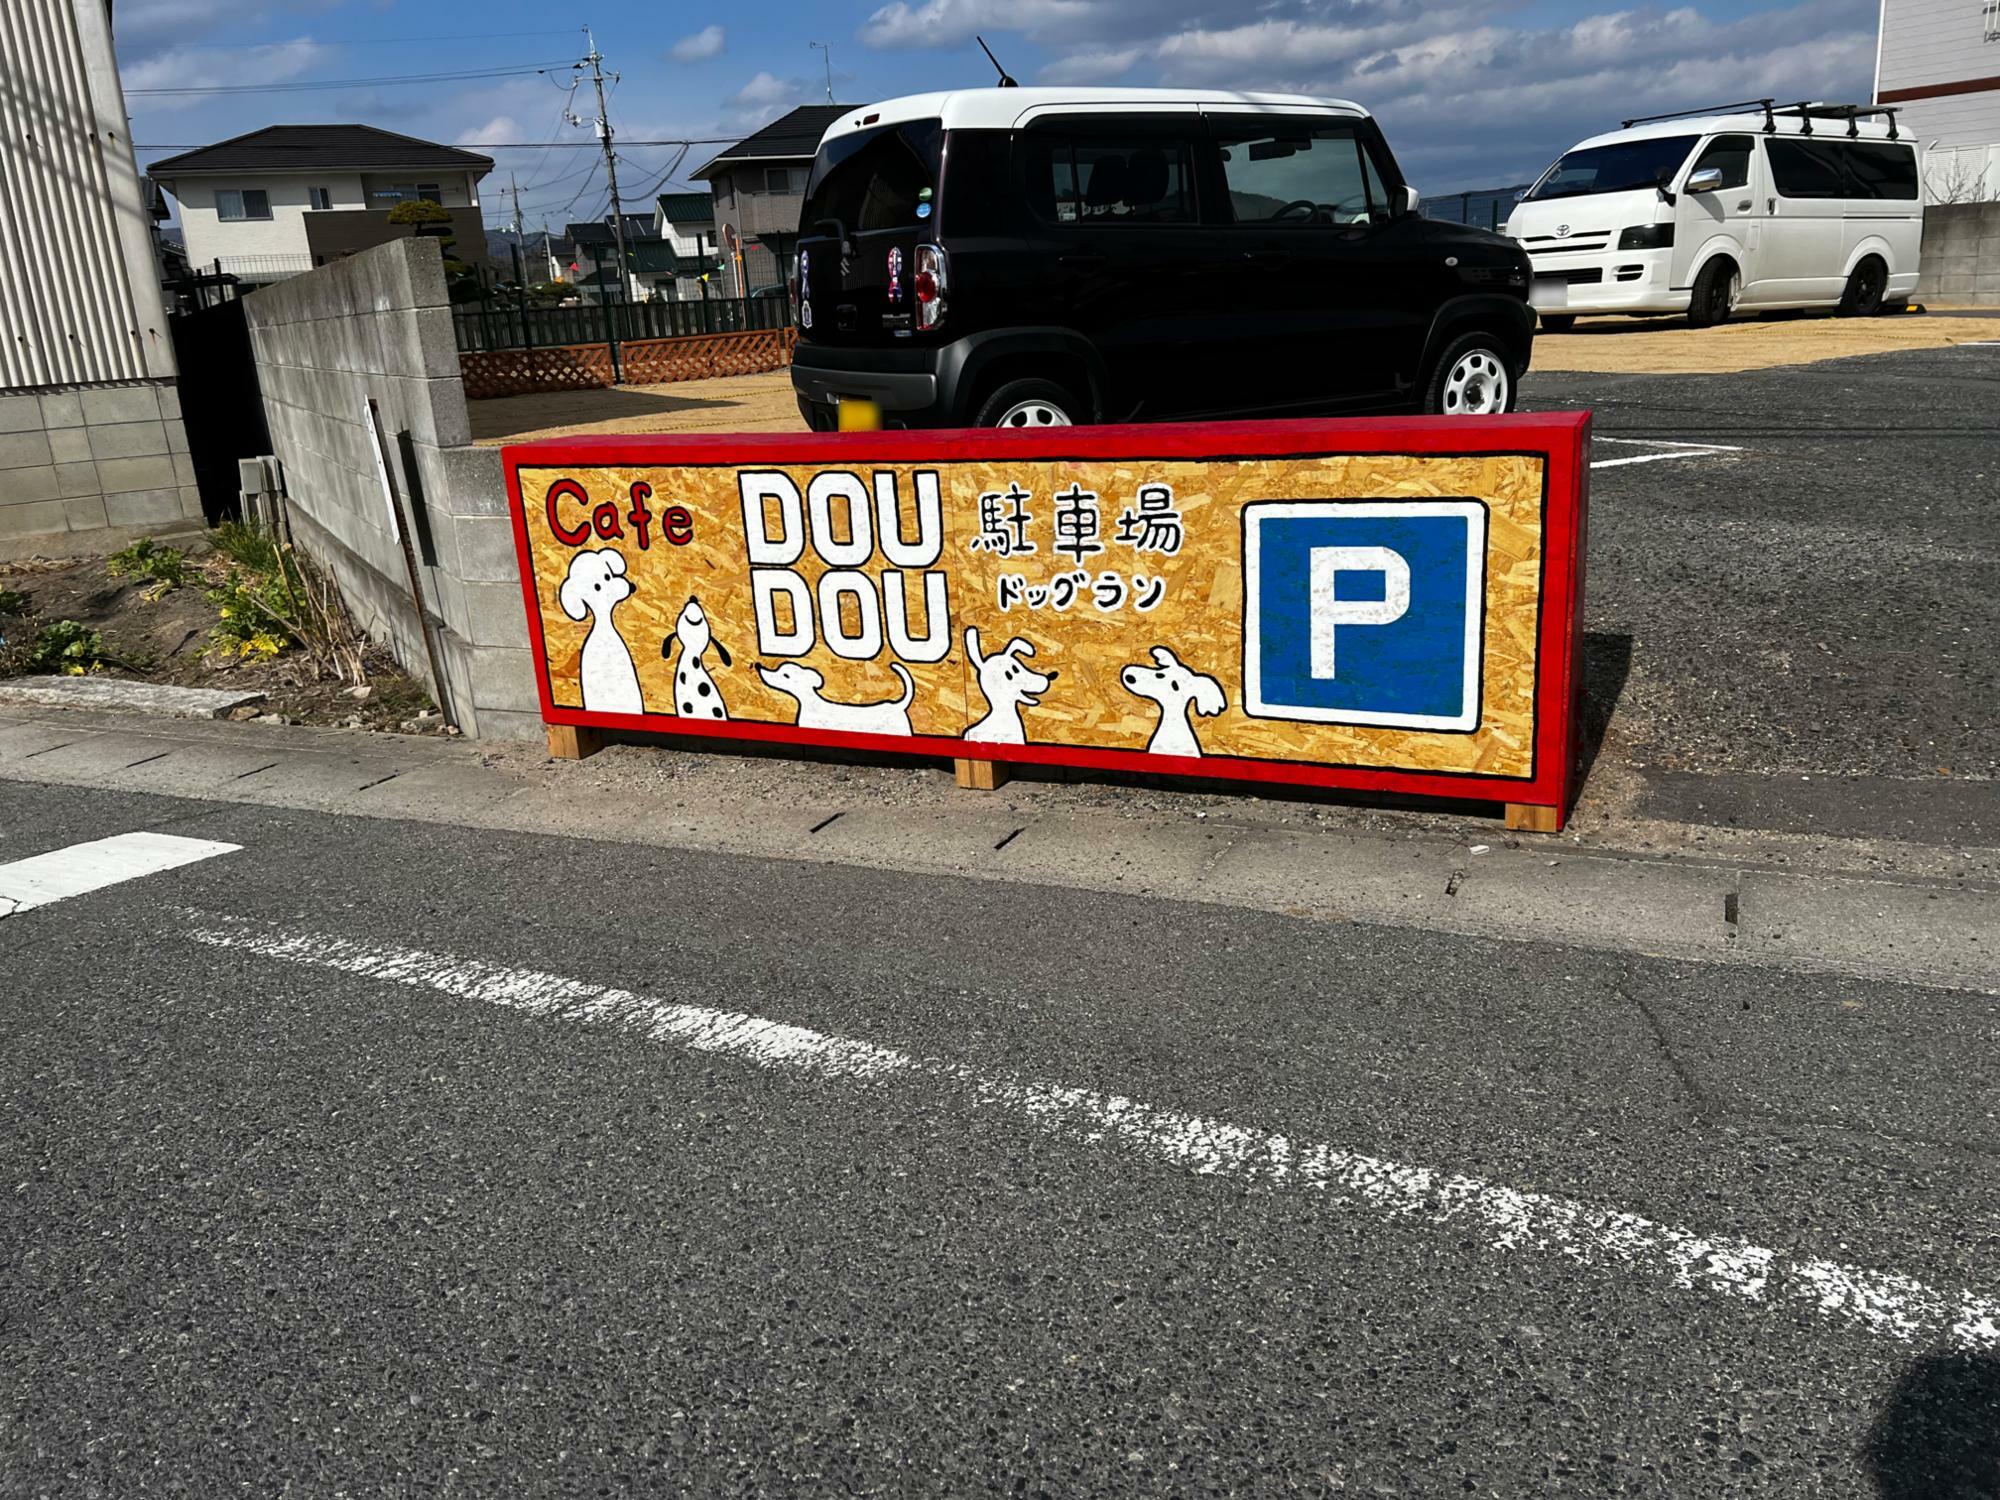 cafe DOUDOU（カフェドゥドゥ）駐車場